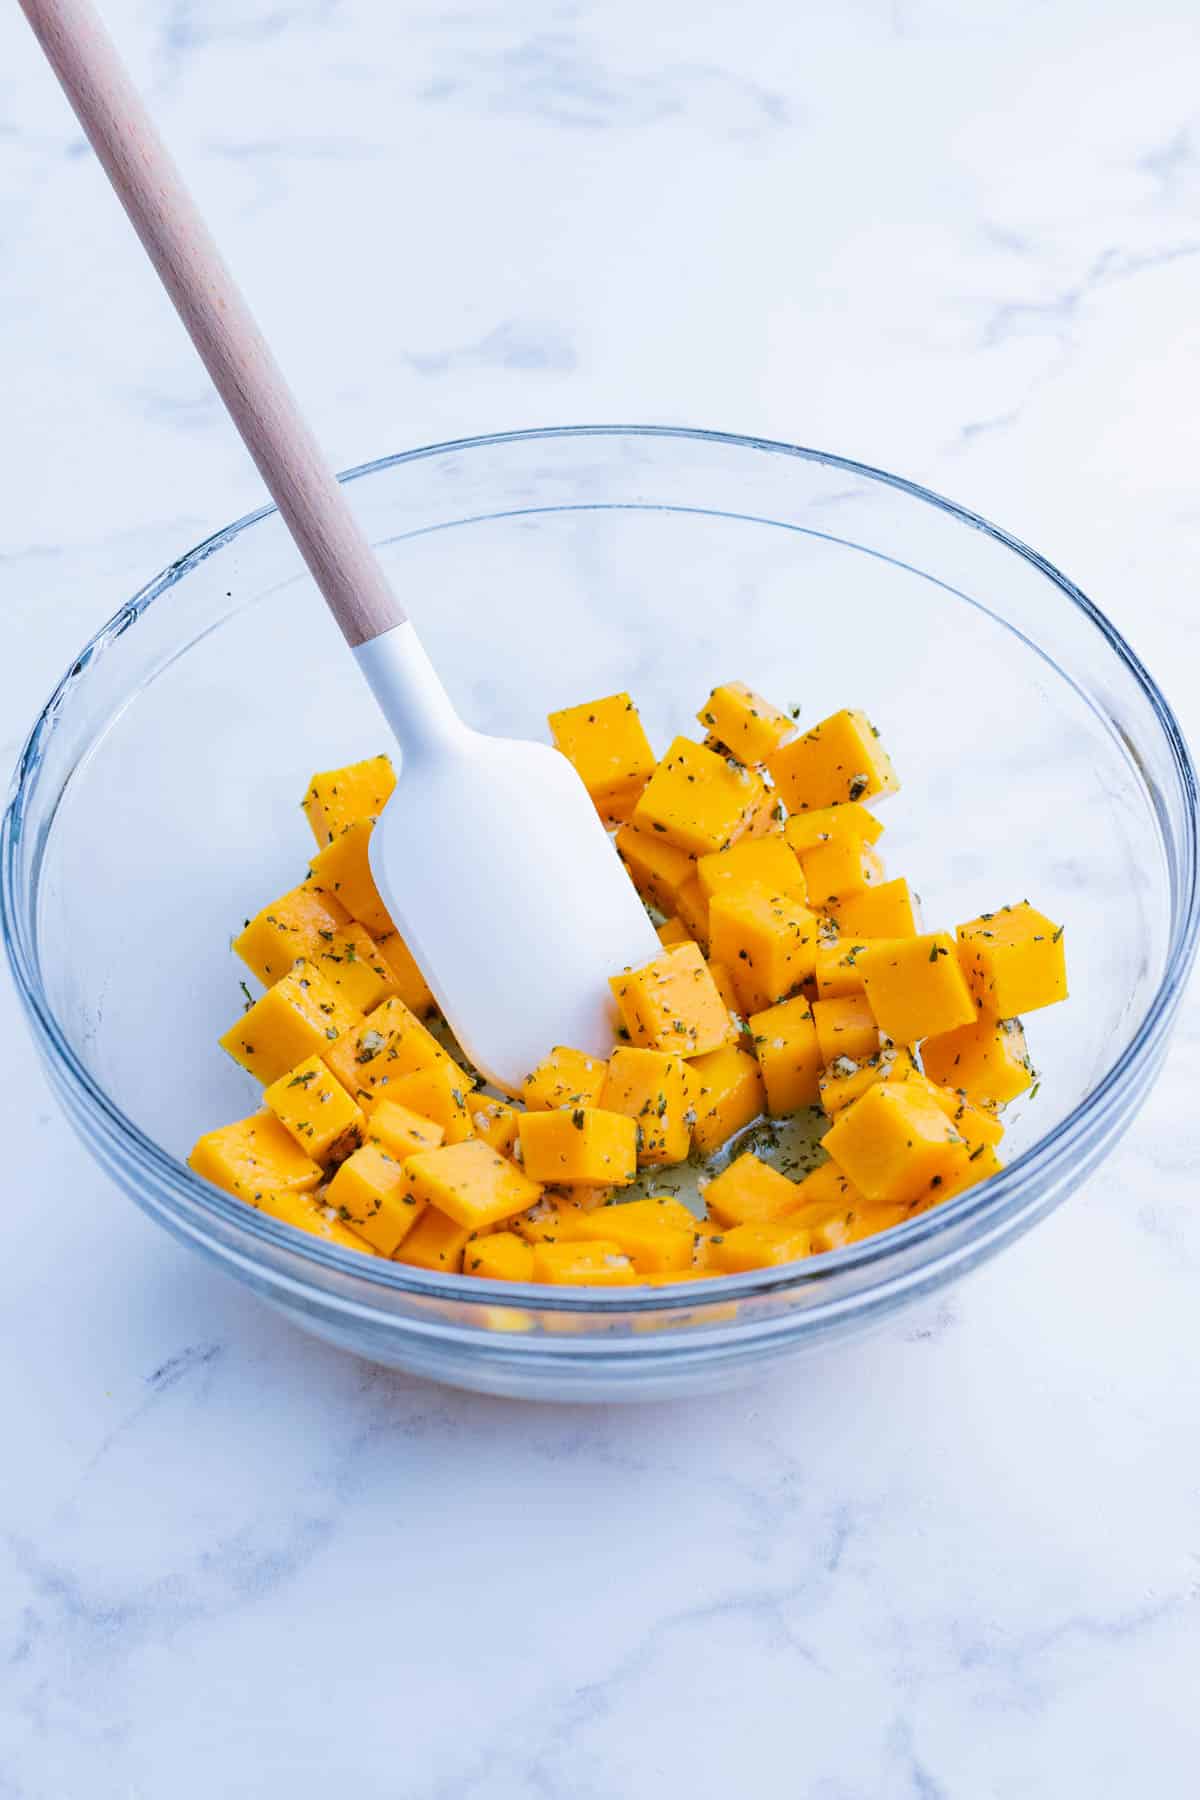 Butternut squash cubes are seasoned with the sauce.